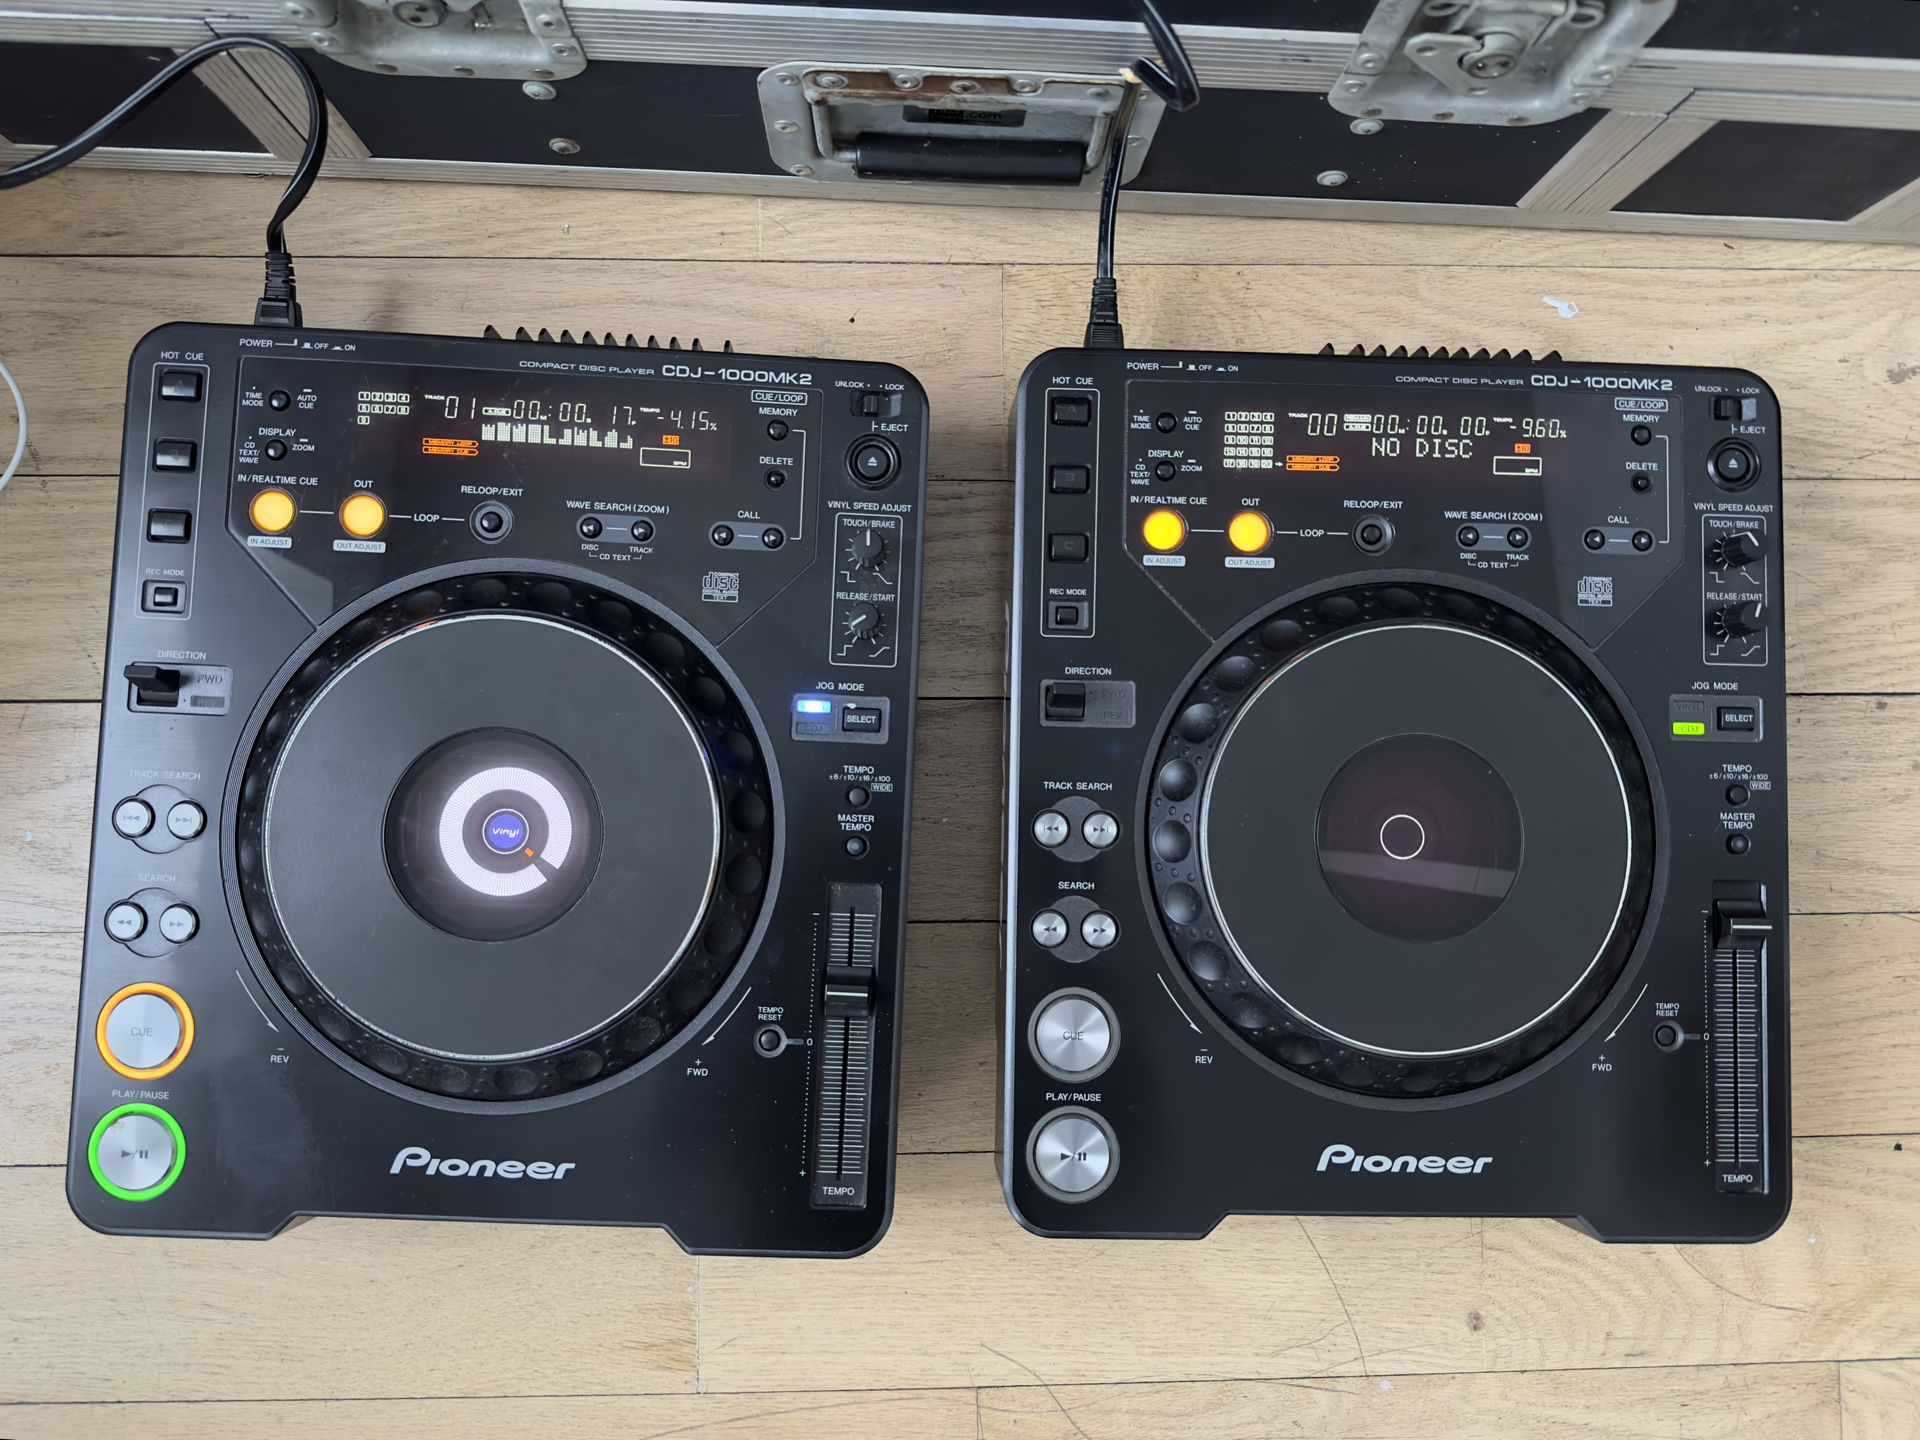 2x CDJ-1000MK2 Pioneer for Sale in Queens, NY - OfferUp